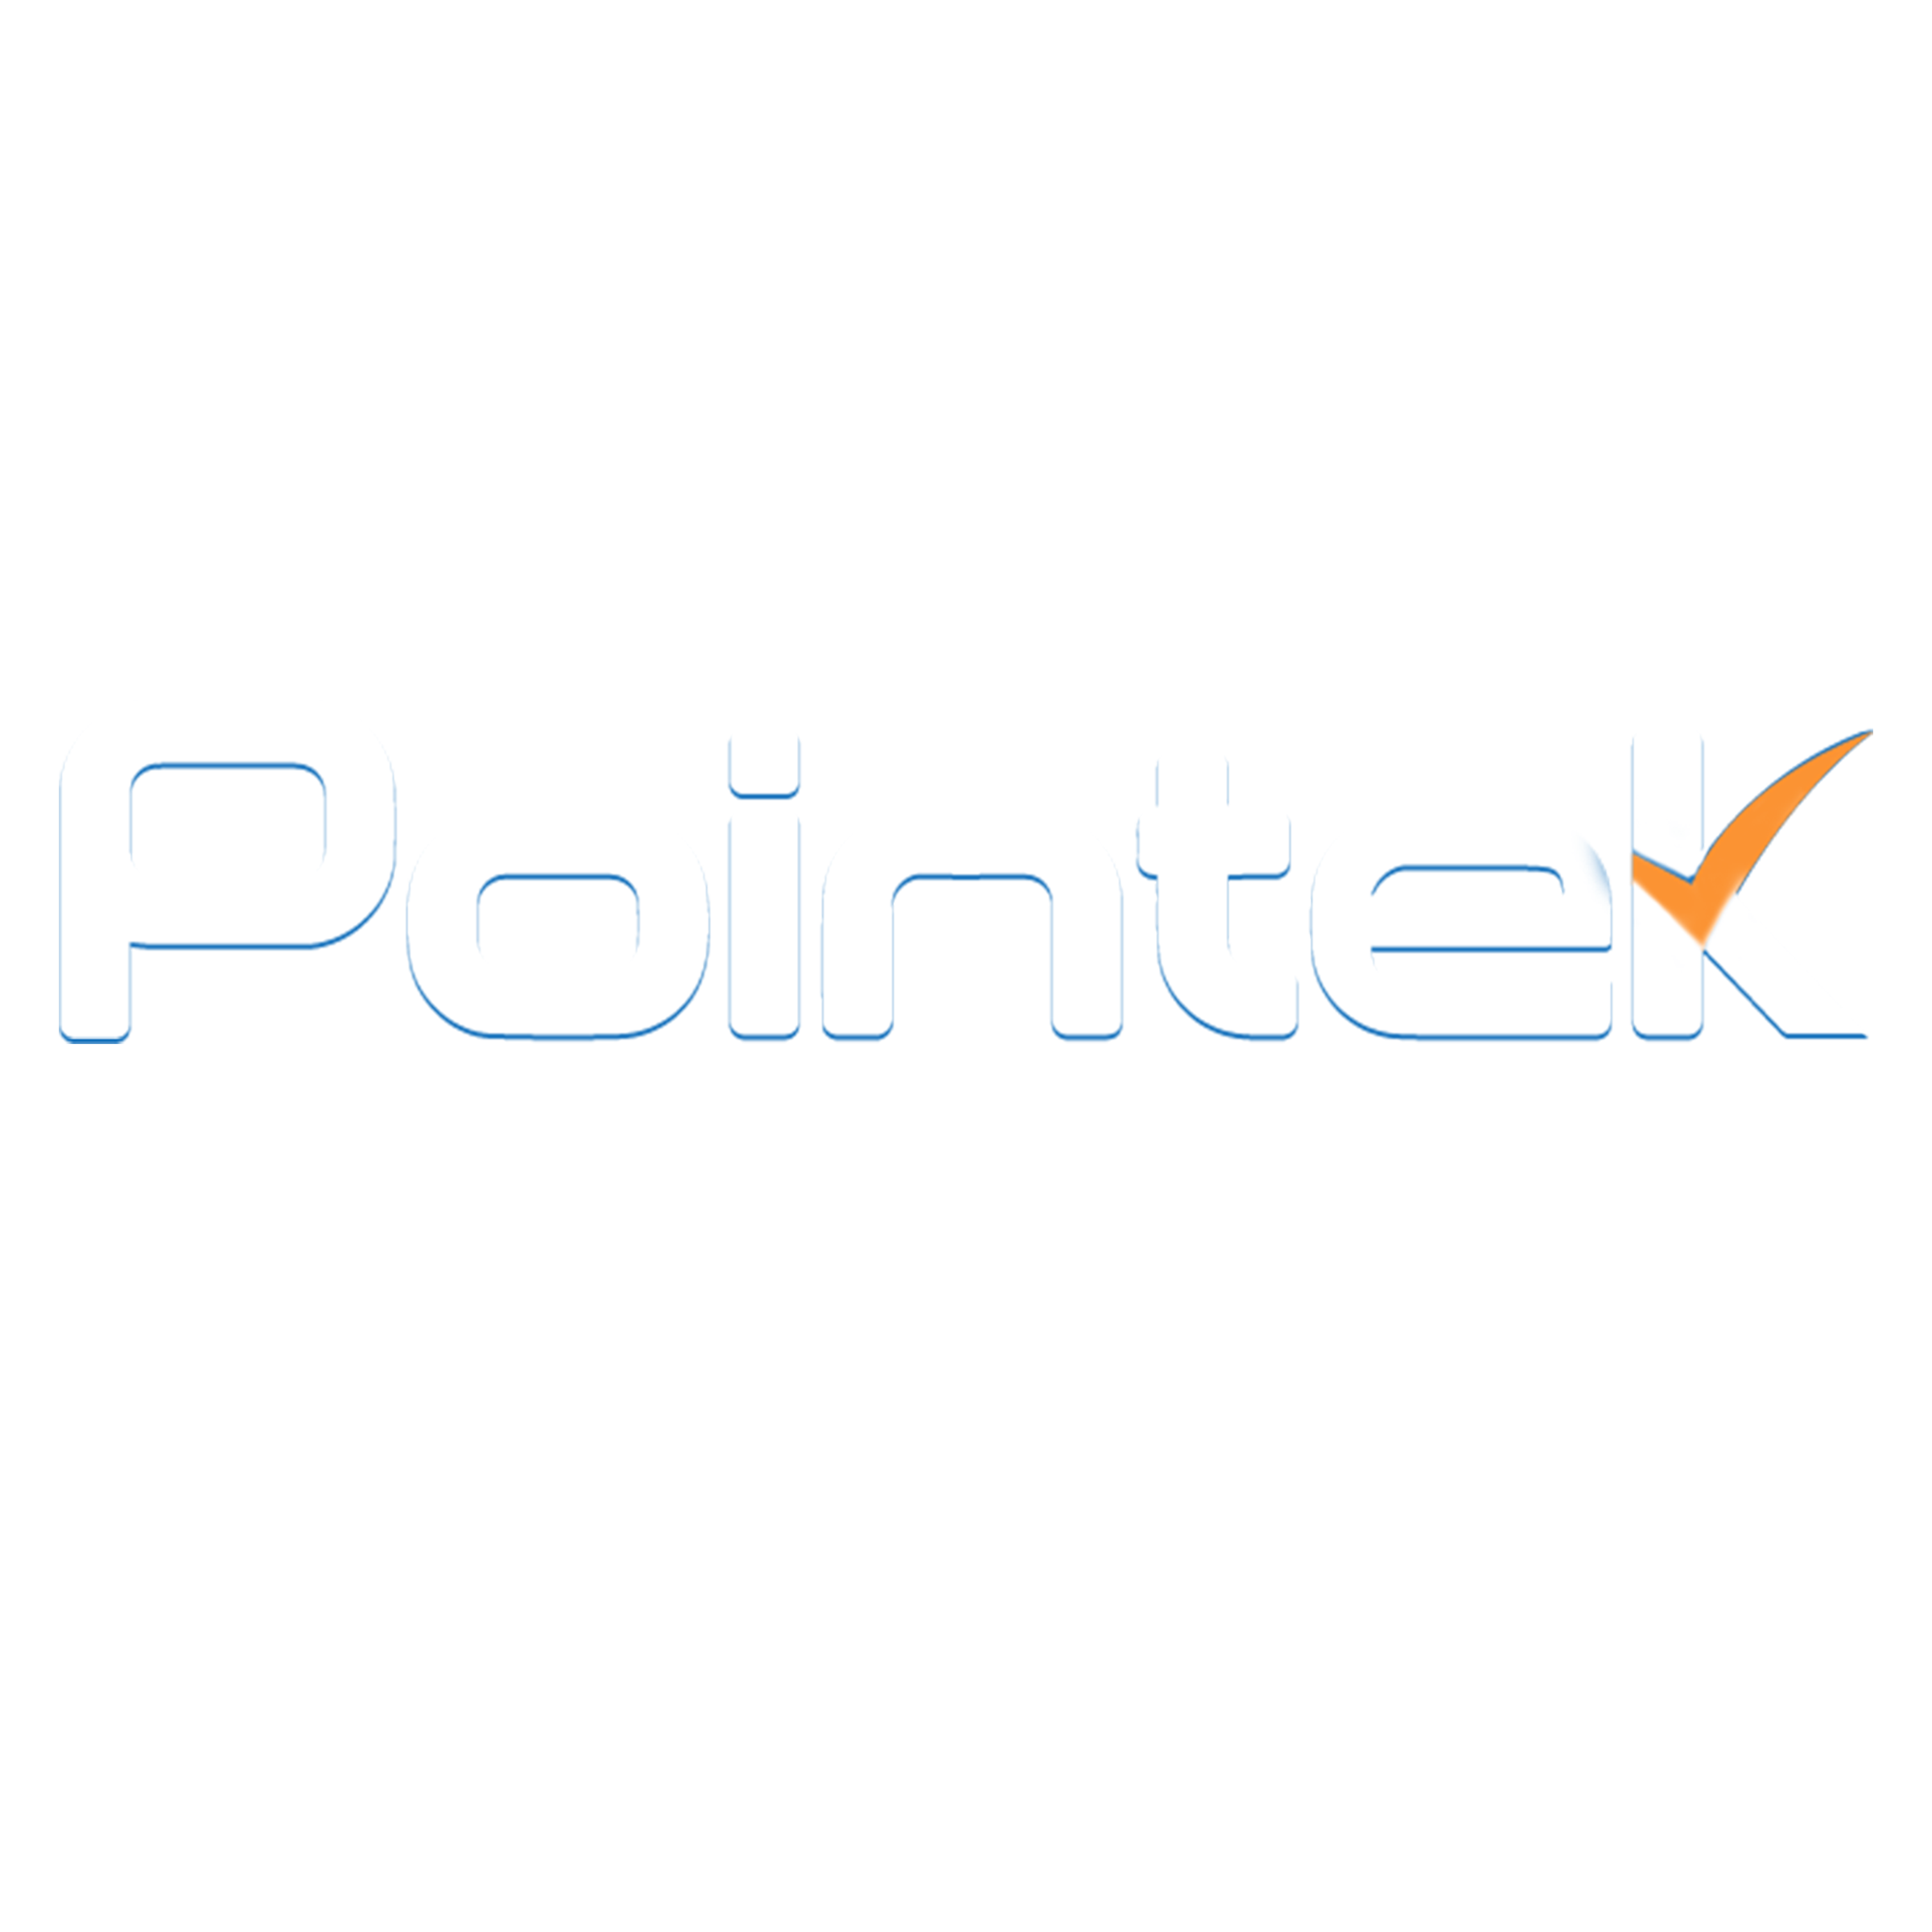 Pointek: Online Shopping for Phones, Electronics, Gadgets & Computers